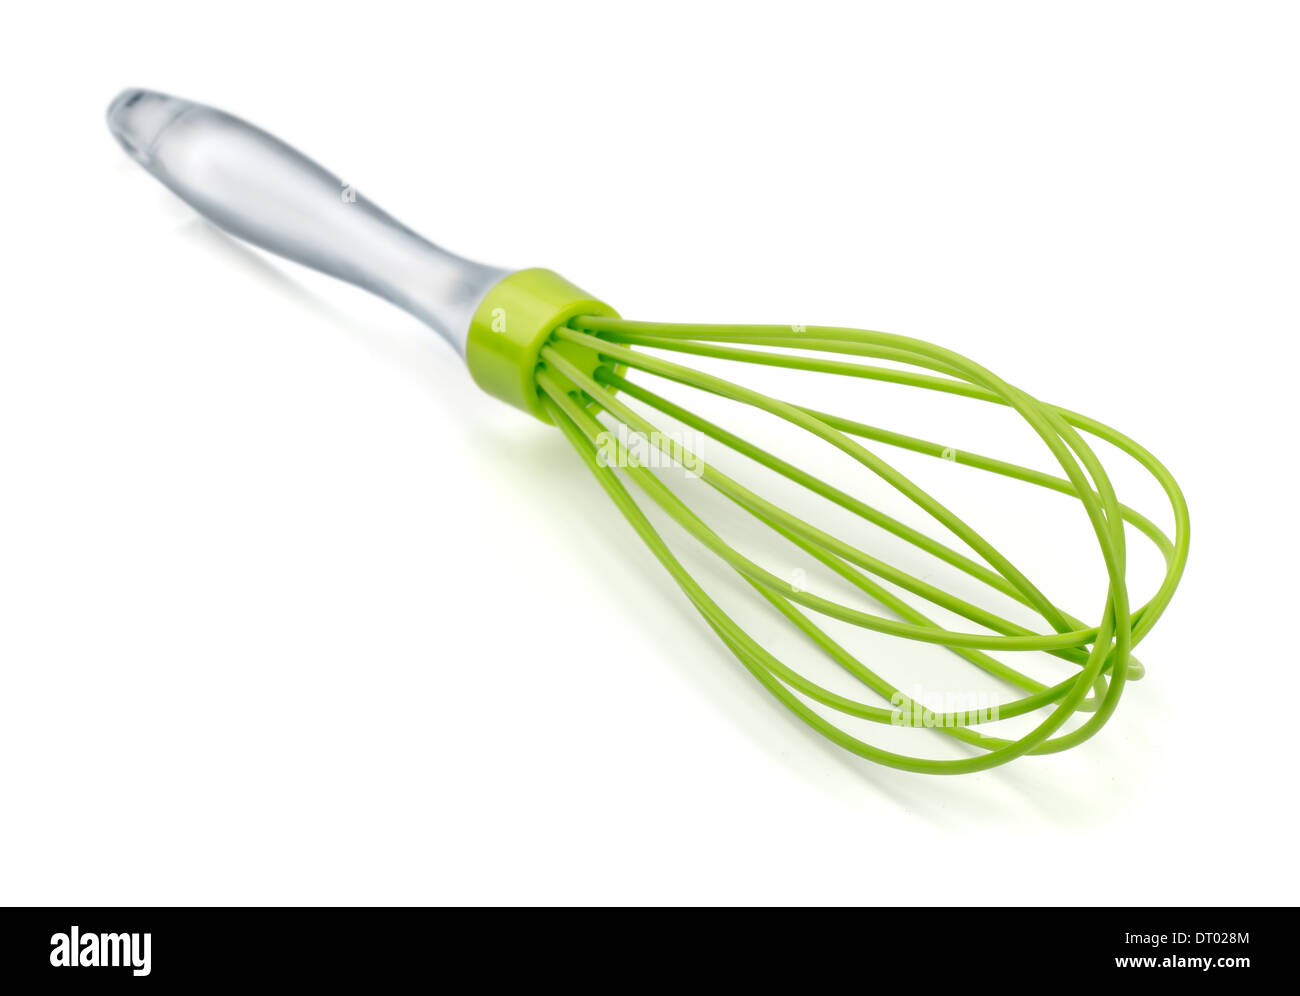 Green plastic kitchen whisk isolated on white Stock Photo